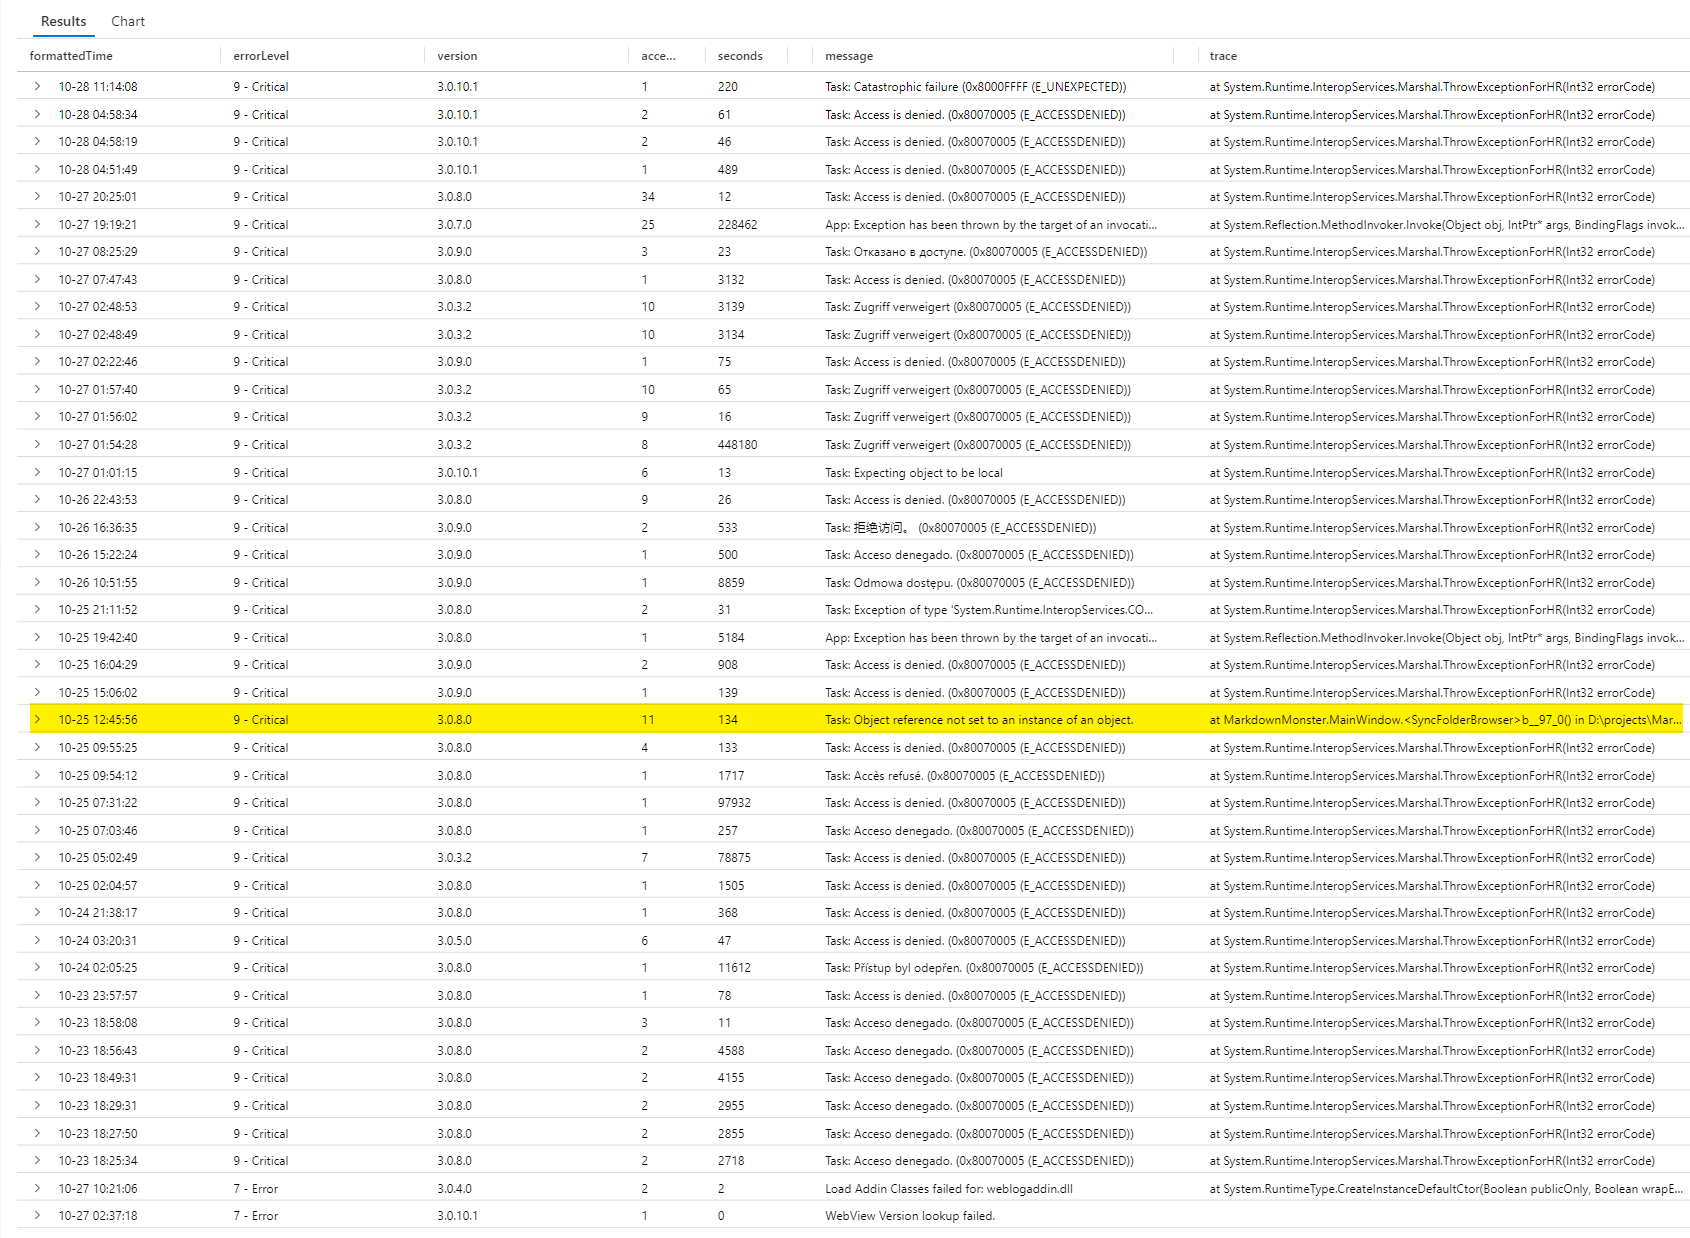 Analytics Error Log showing mostly WebView errors